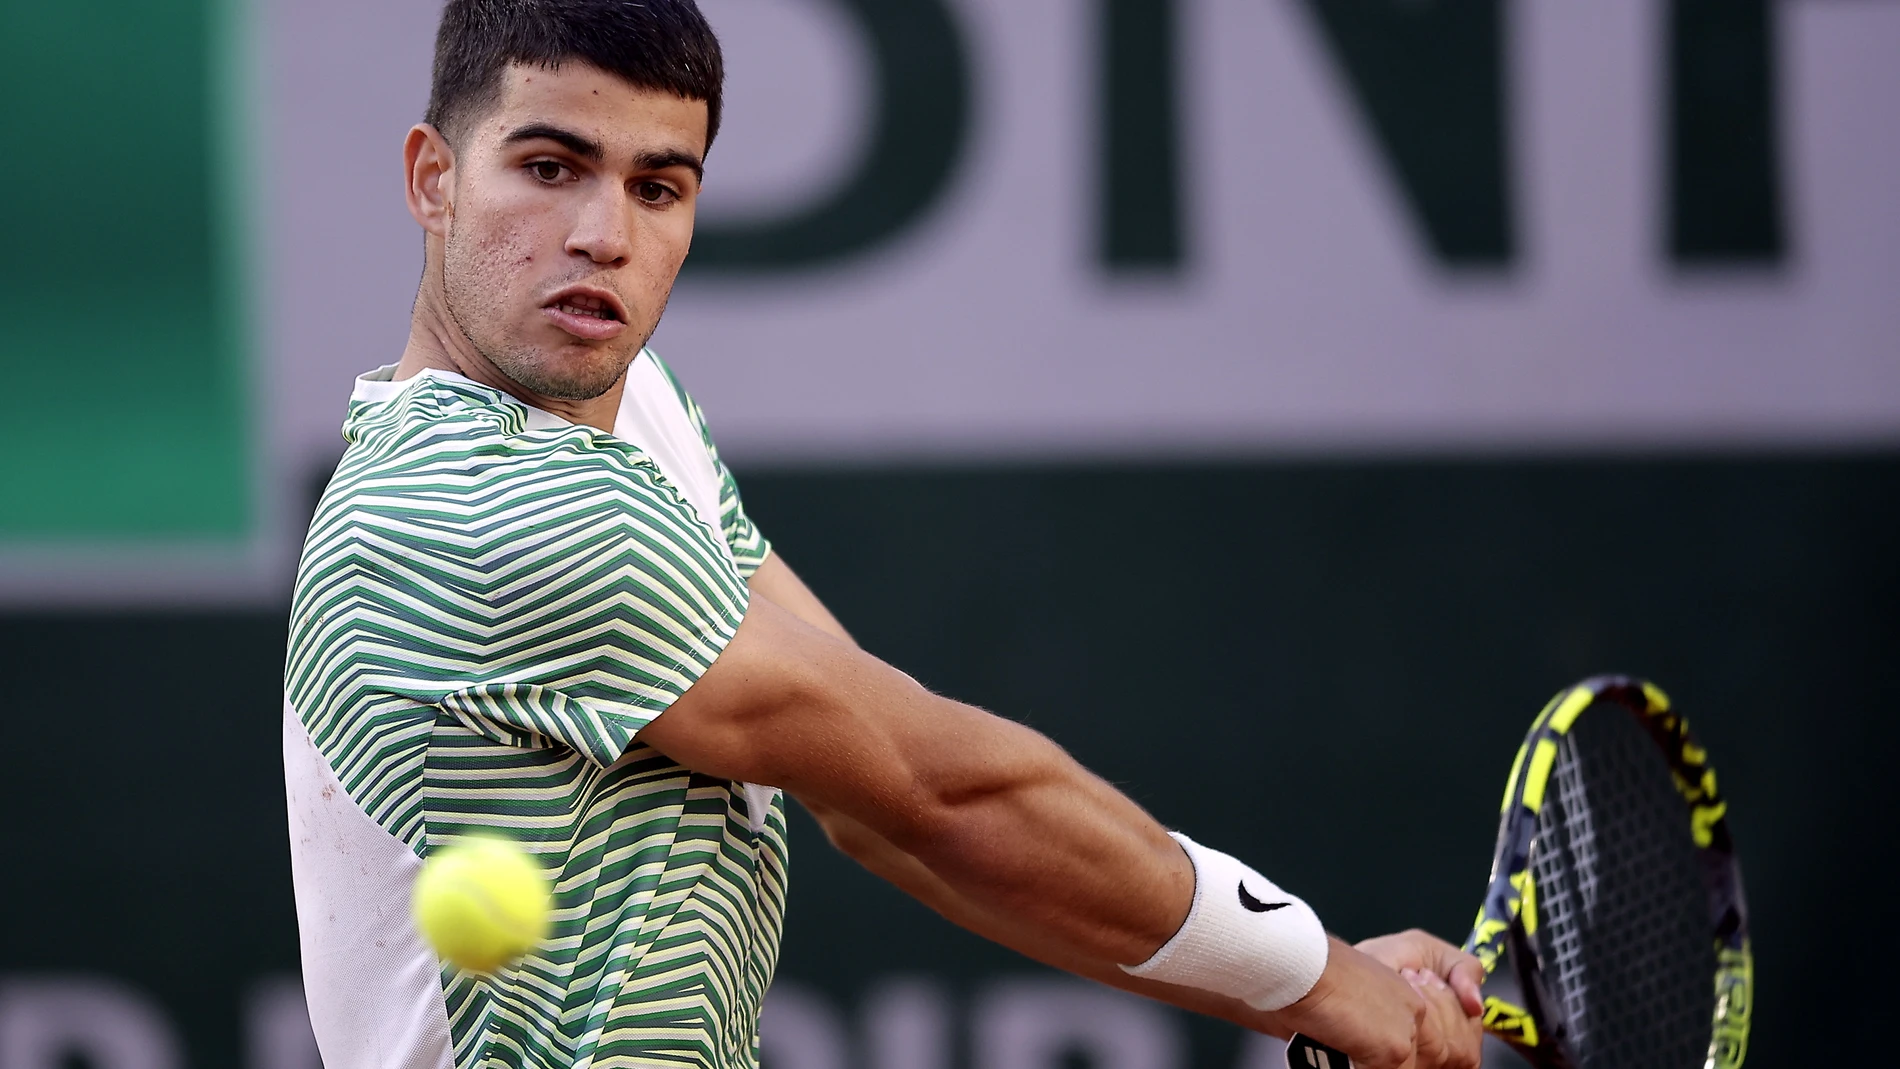 Paris (France), 29/05/2023.- Carlos Alcaraz of Spain plays Flavio Cobolli of Italy in their Men's Singles first round match during the French Open Grand Slam tennis tournament at Roland Garros in Paris, France, 29 May 2023. (Tenis, Abierto, Francia, Italia, España) EFE/EPA/CHRISTOPHE PETIT TESSON 